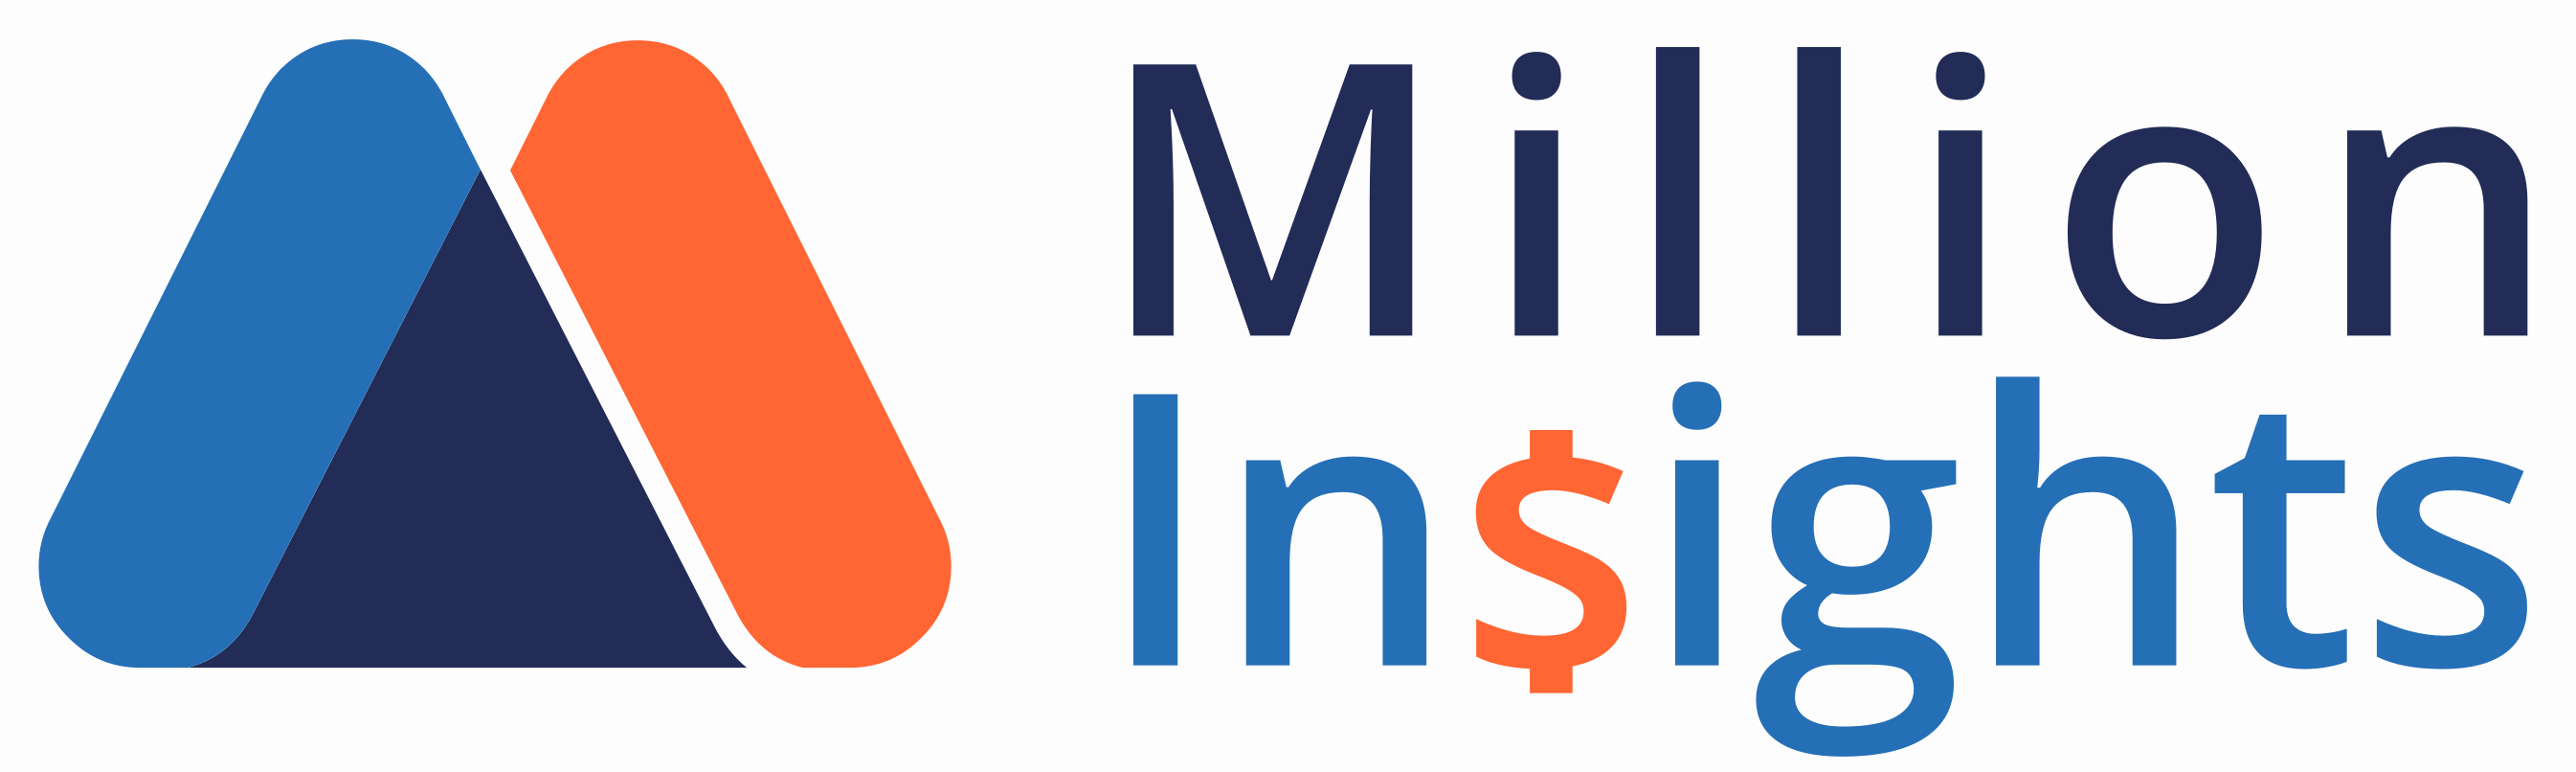 Milking Robots Market Is Staring At A Promising Future By 2025 - Latest Research Along with Expert Reviews, Opportunities Analysis and Growth Prospects | Million Insights